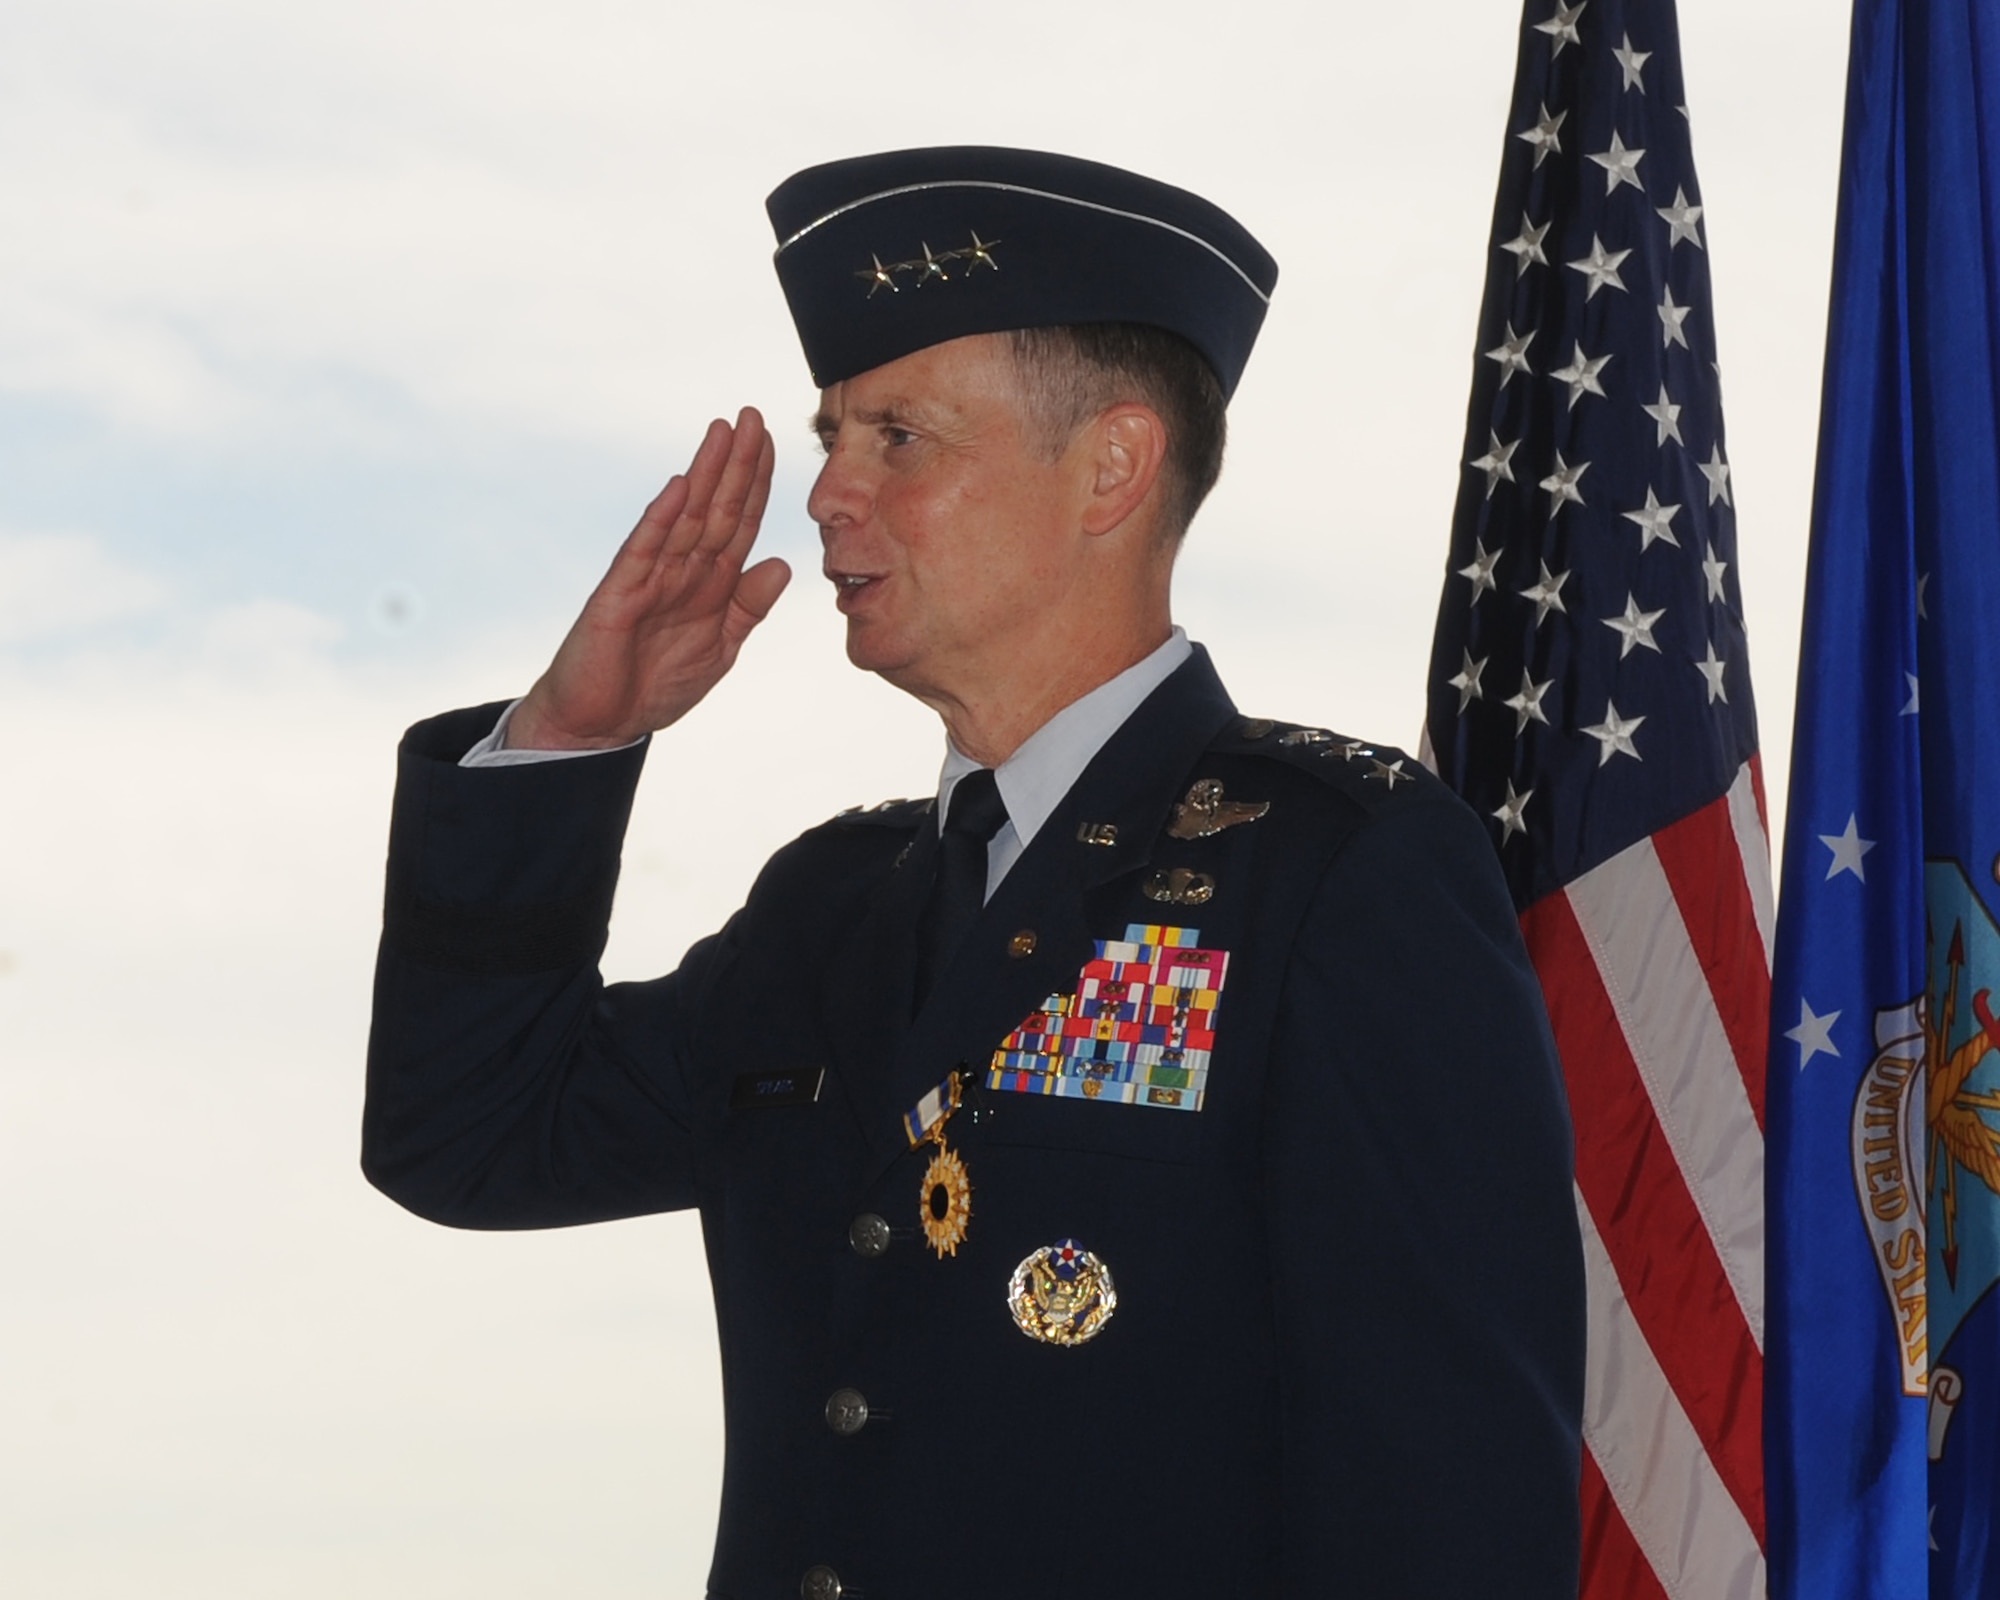 Lt. Gen. Glenn Spears returns a final salute to the men and women of 12th Air Force during his retirement ceremony June 1 at Davis-Monthan Air Force Base, Ariz. (U.S. Air Force photo/Senior Airman Brittany Dowdle)